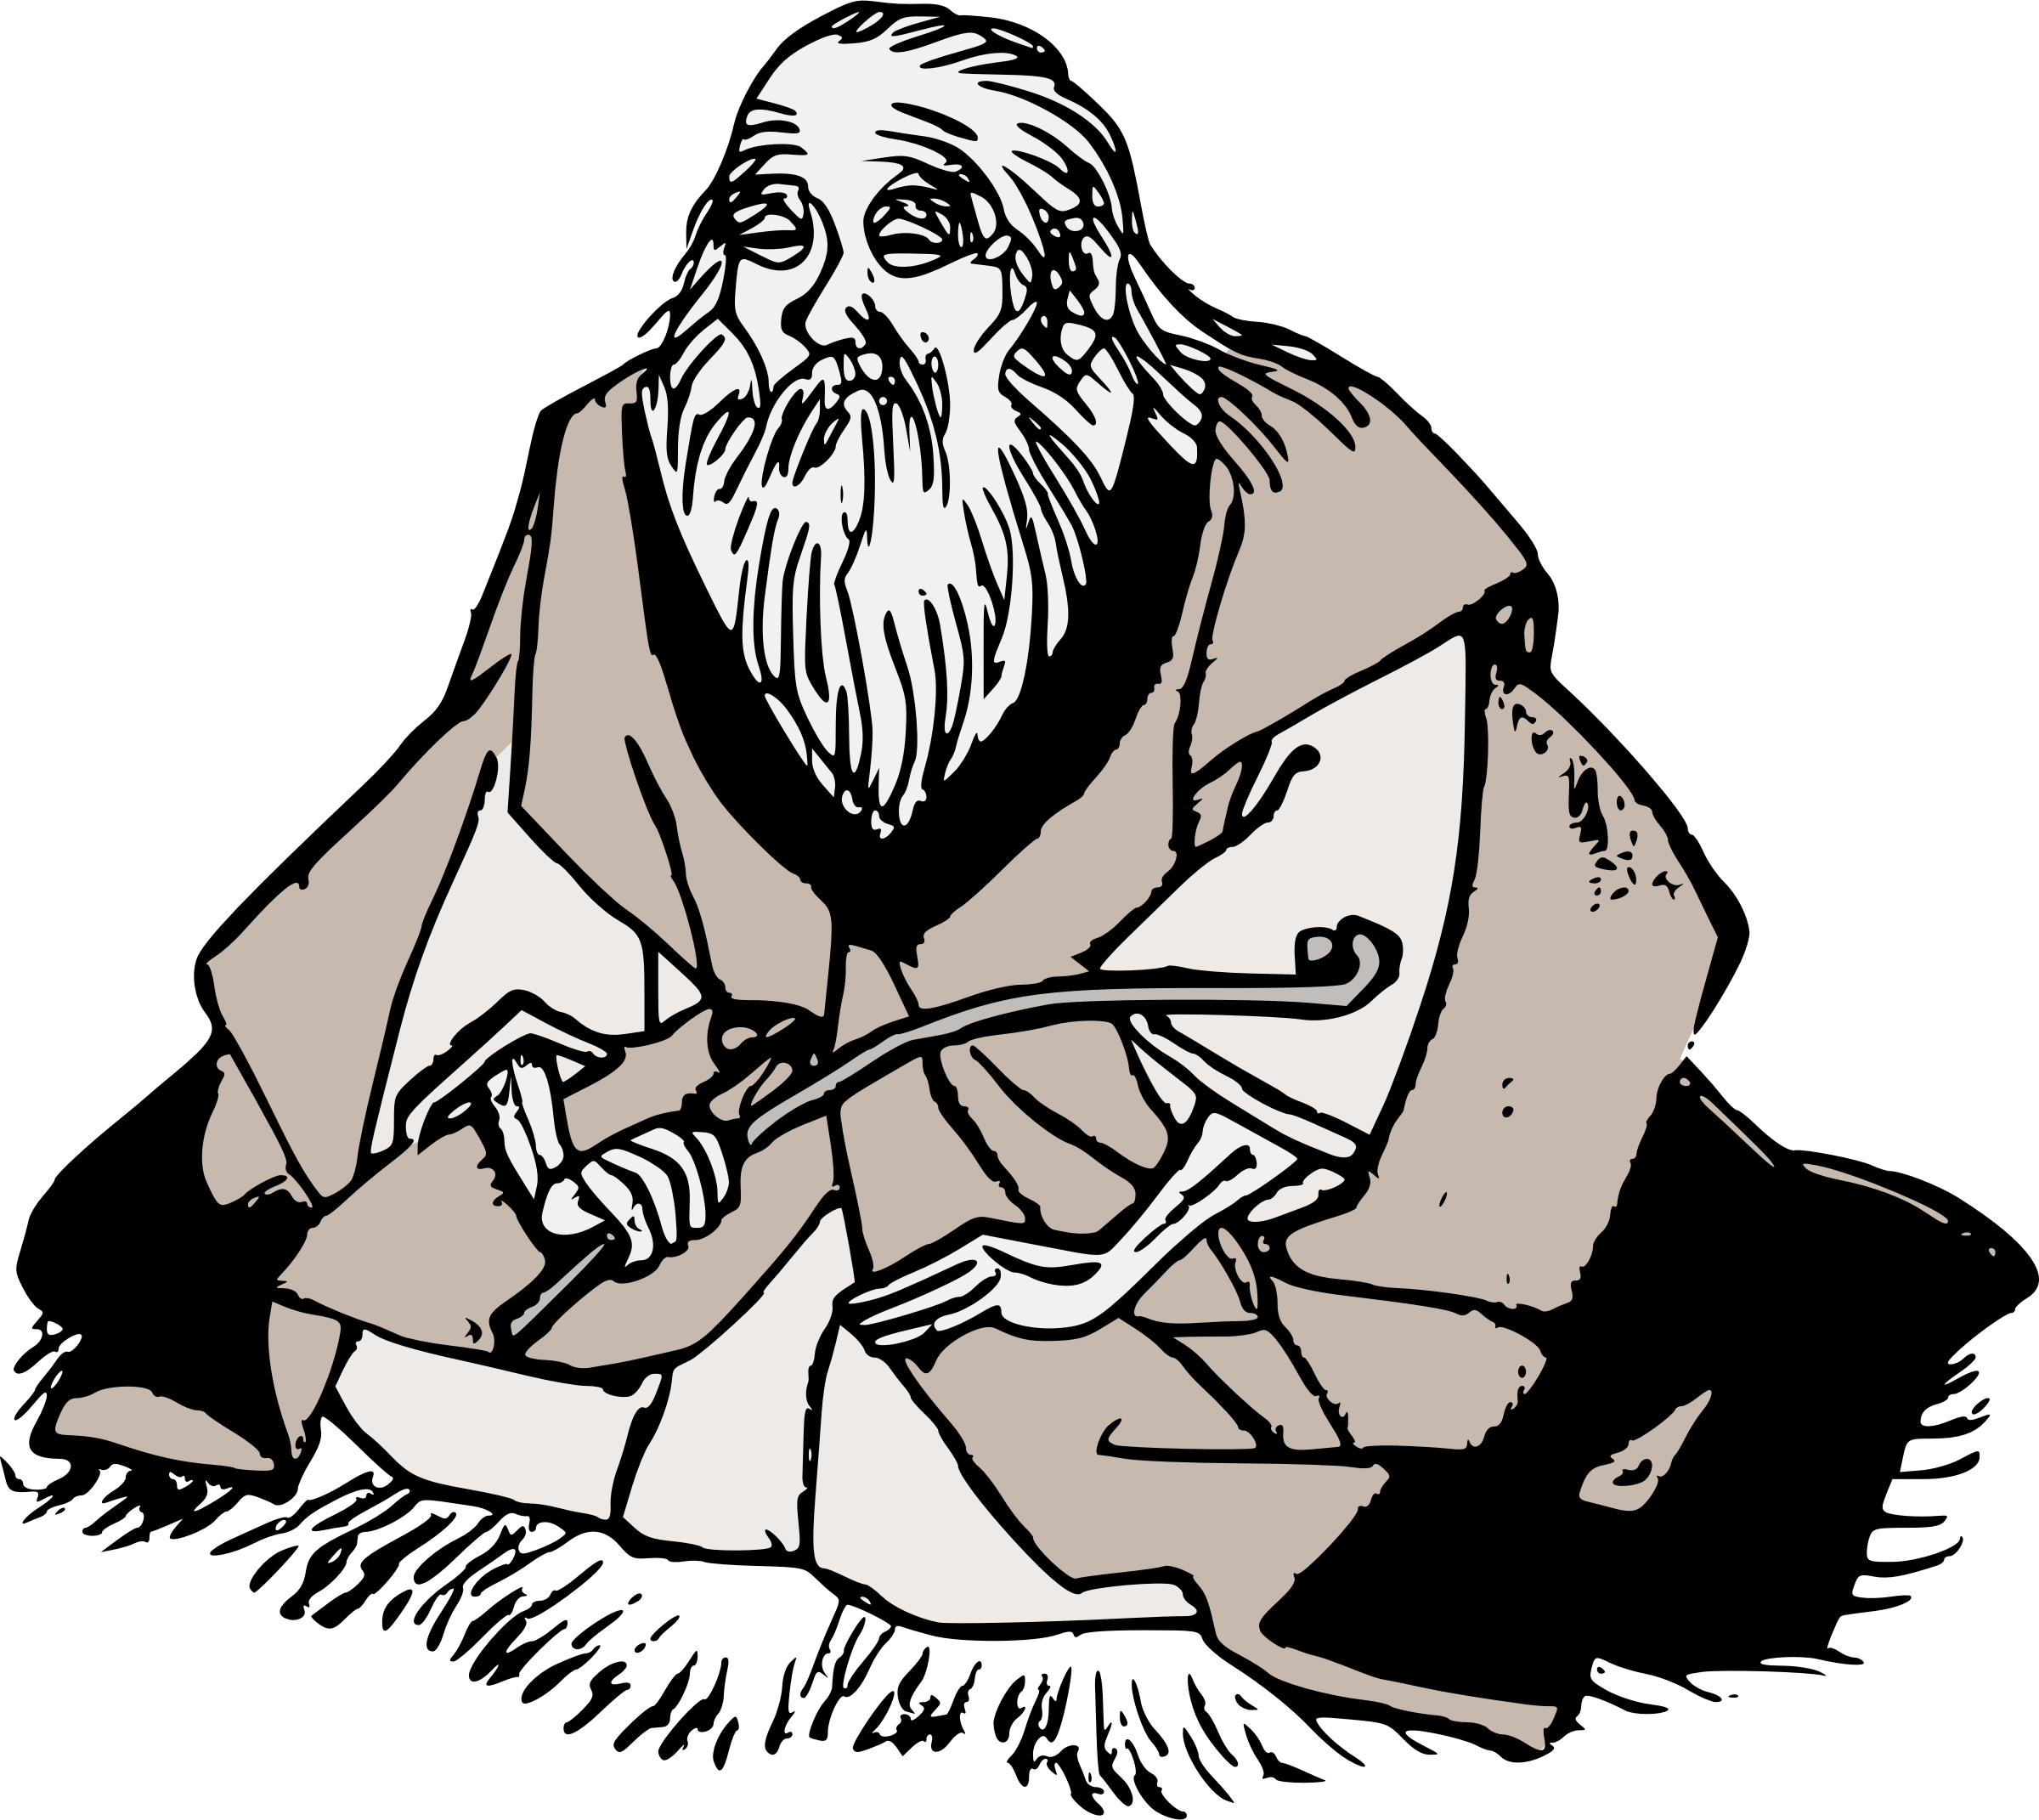 Wise - Wise Man, Transparent background PNG HD thumbnail